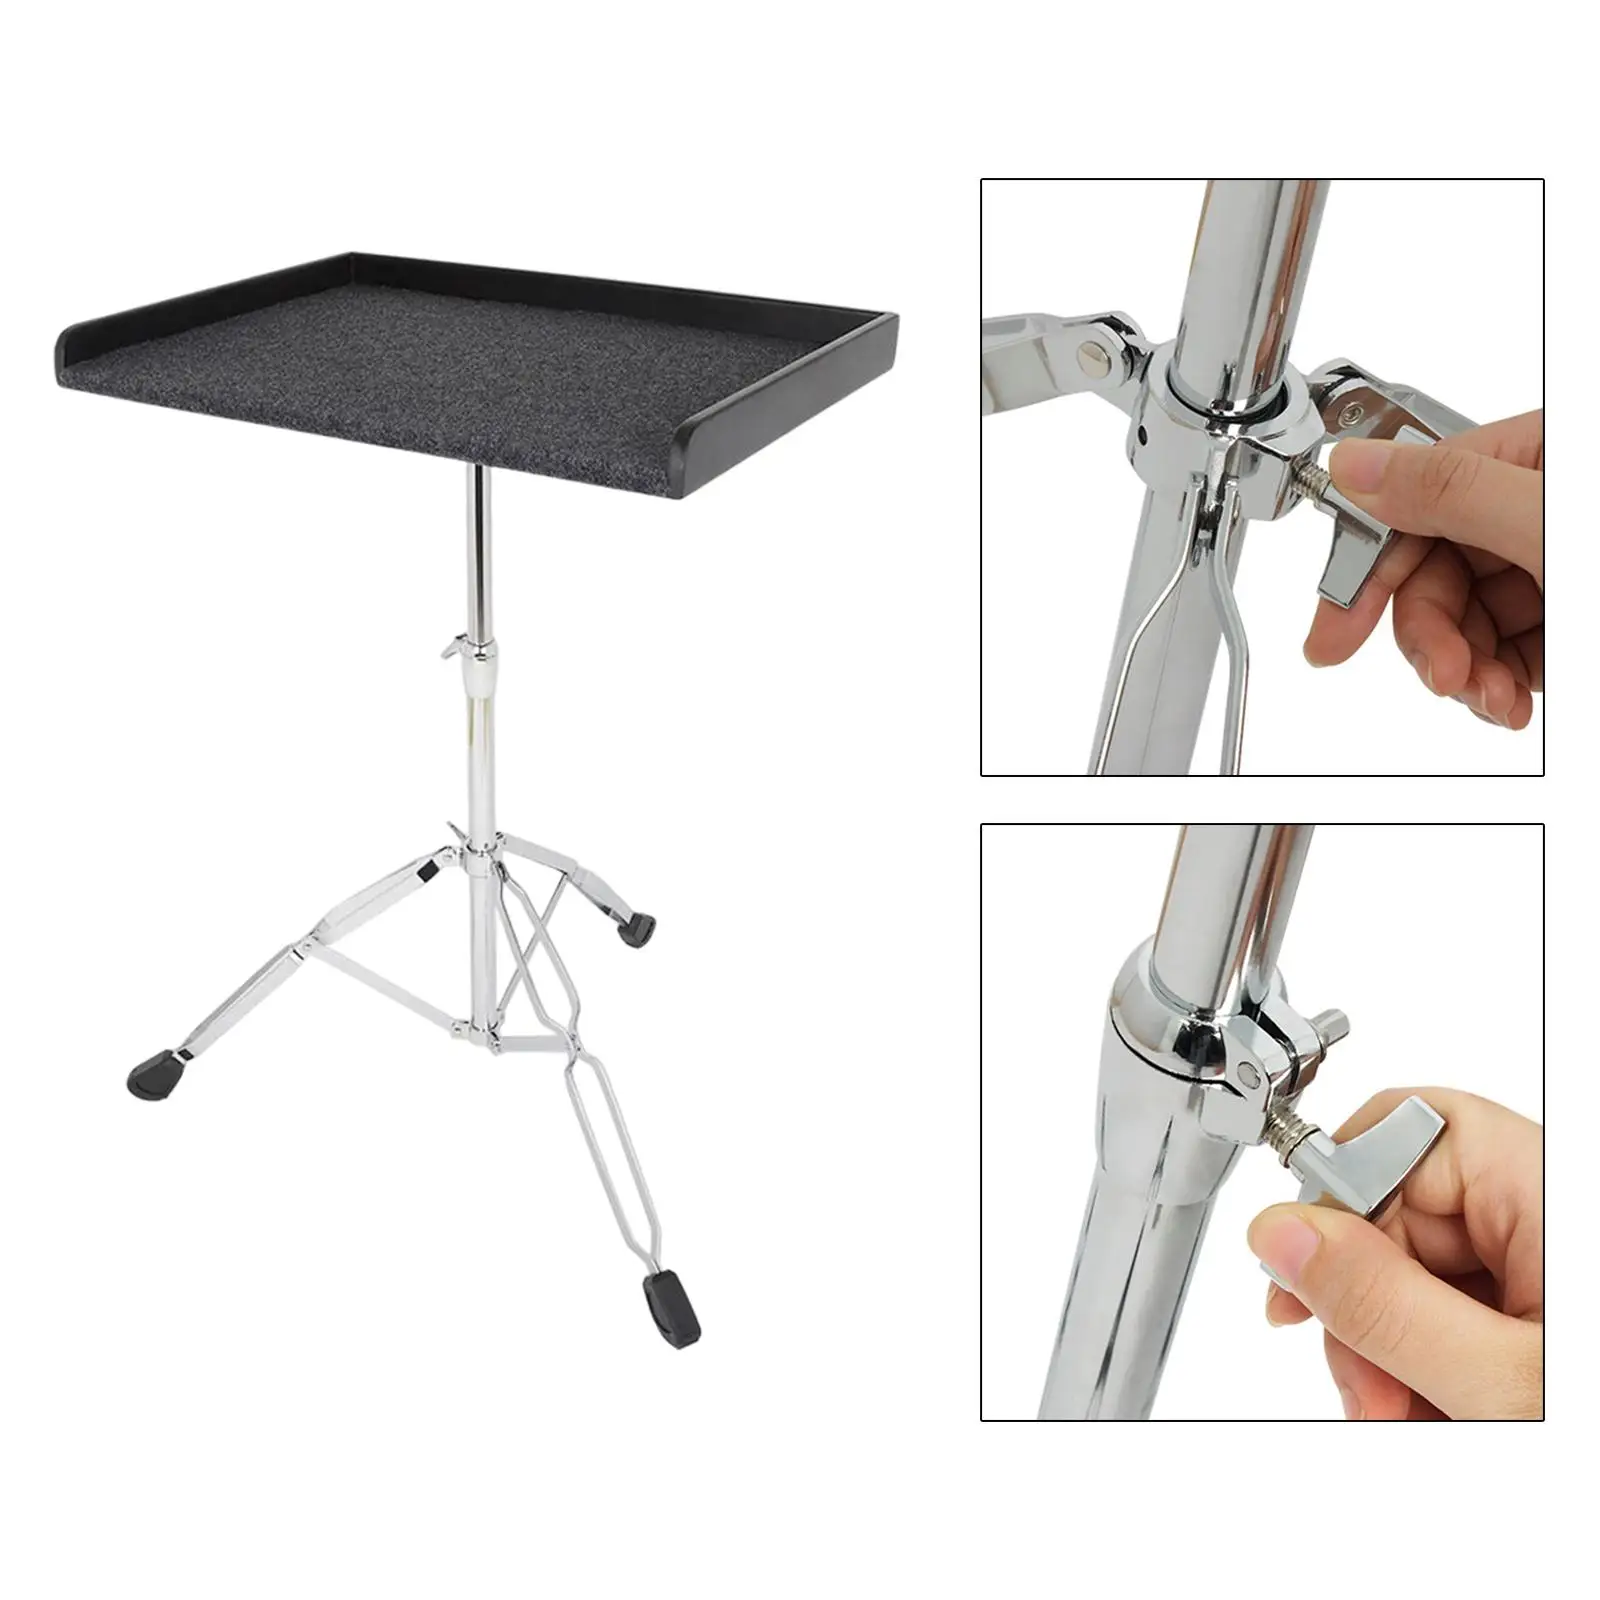 Percussion Table Mount Holder Thick EVA Padded DJ Laptop Portable for Stage